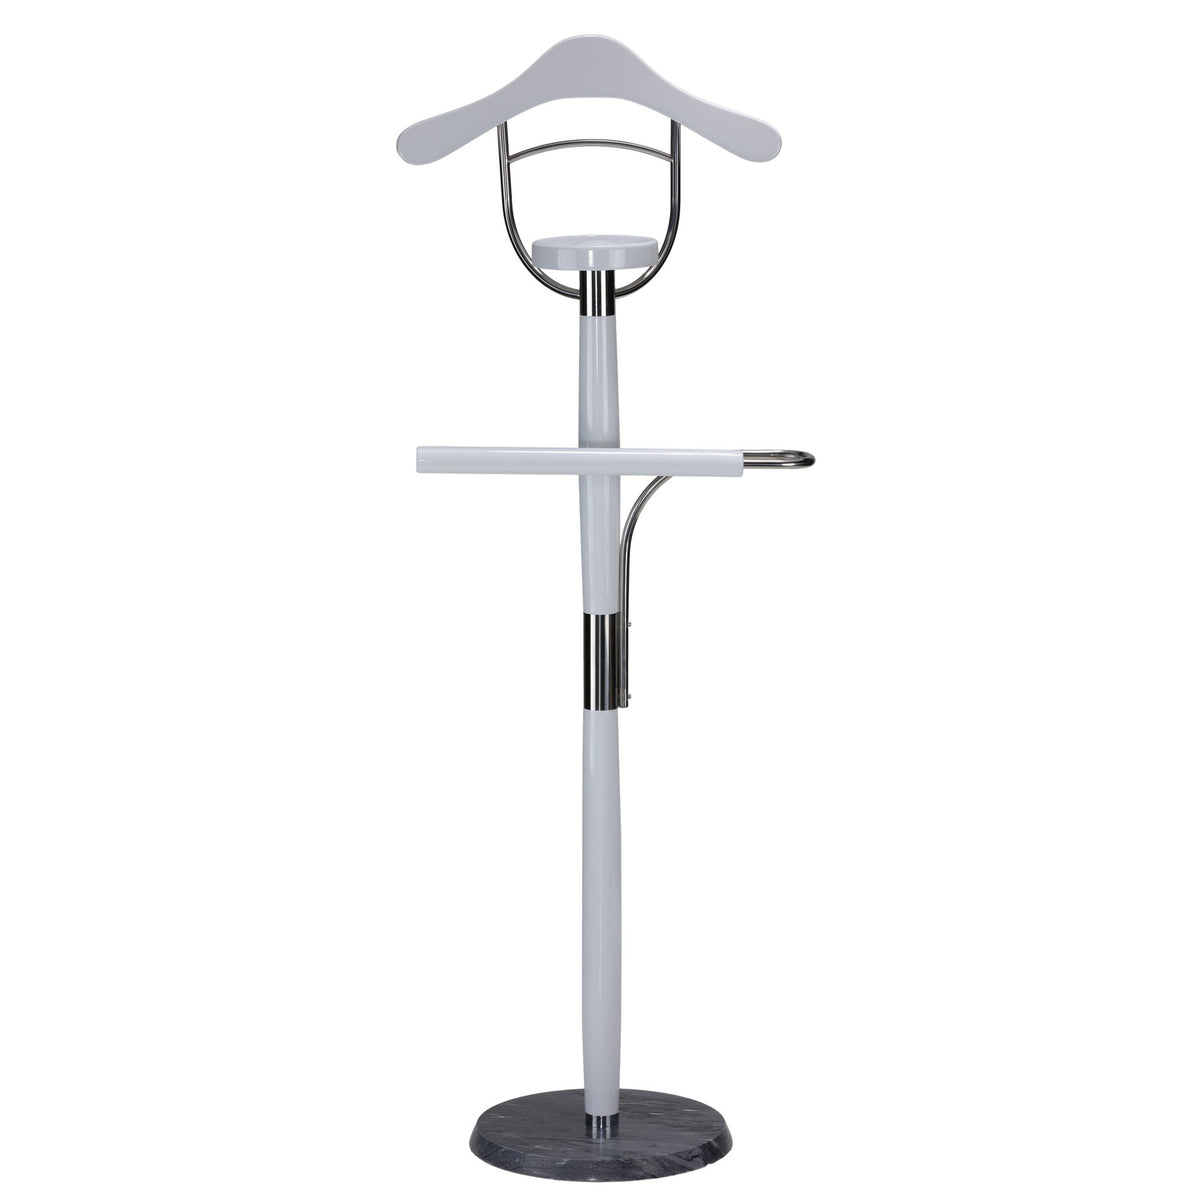 Cortesi Home Winfield Suit Valet Stand in Contemporary White Lacquer Wood